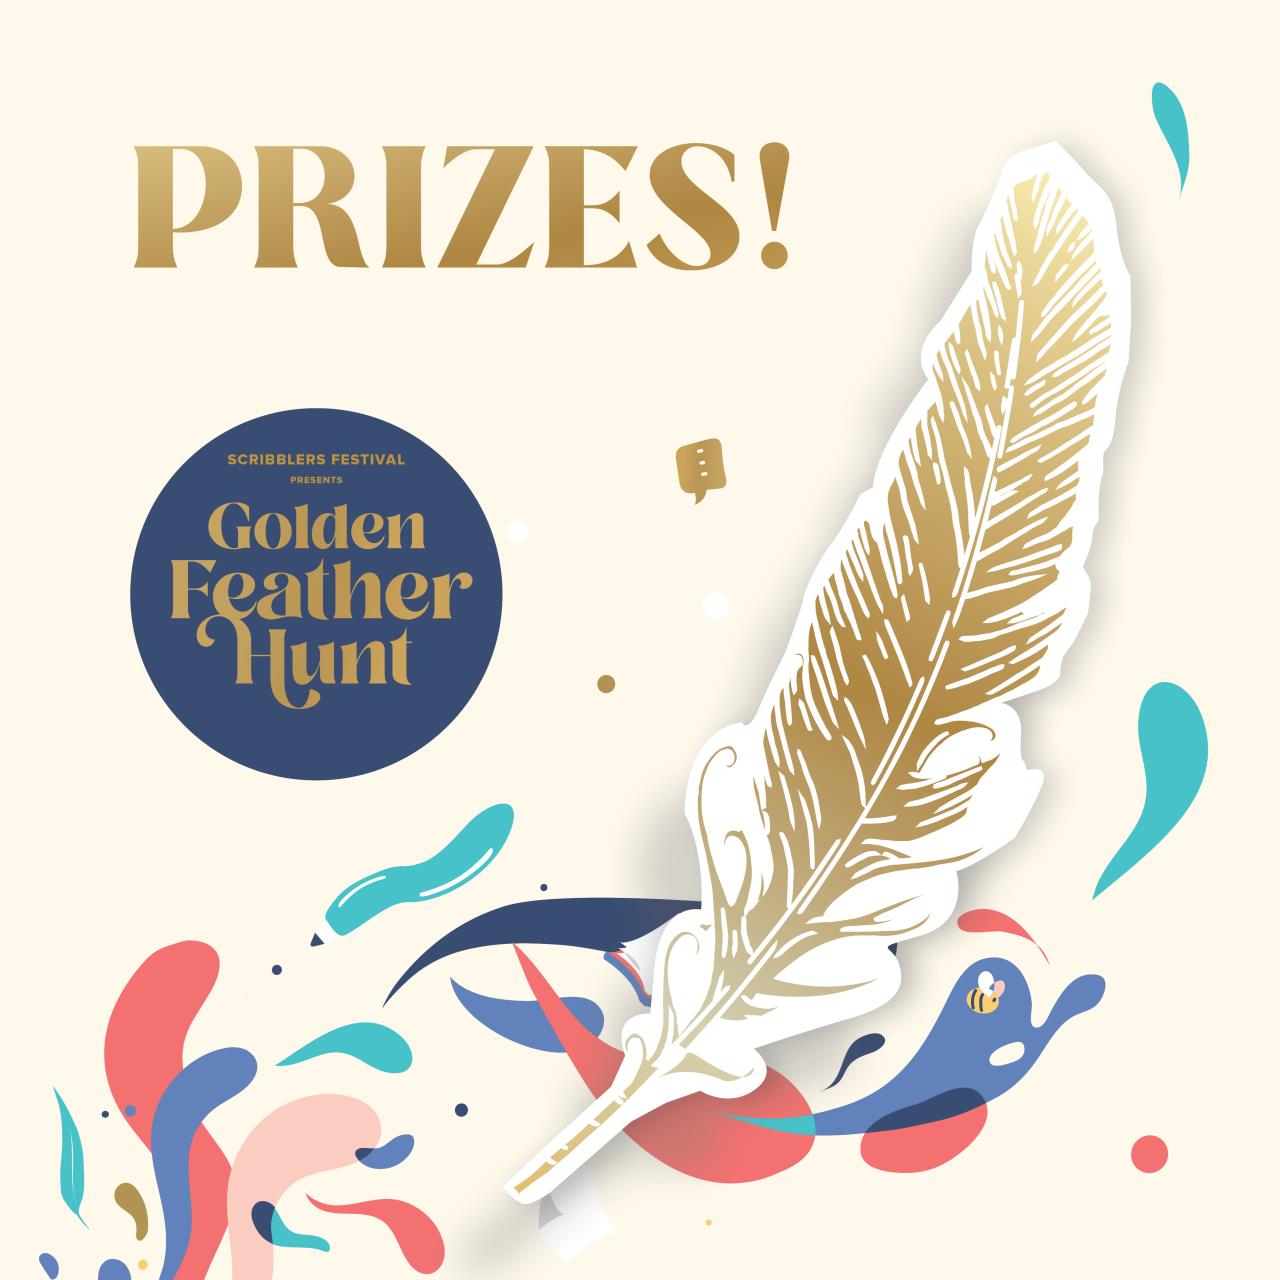 Golden Feather Hunt is on!